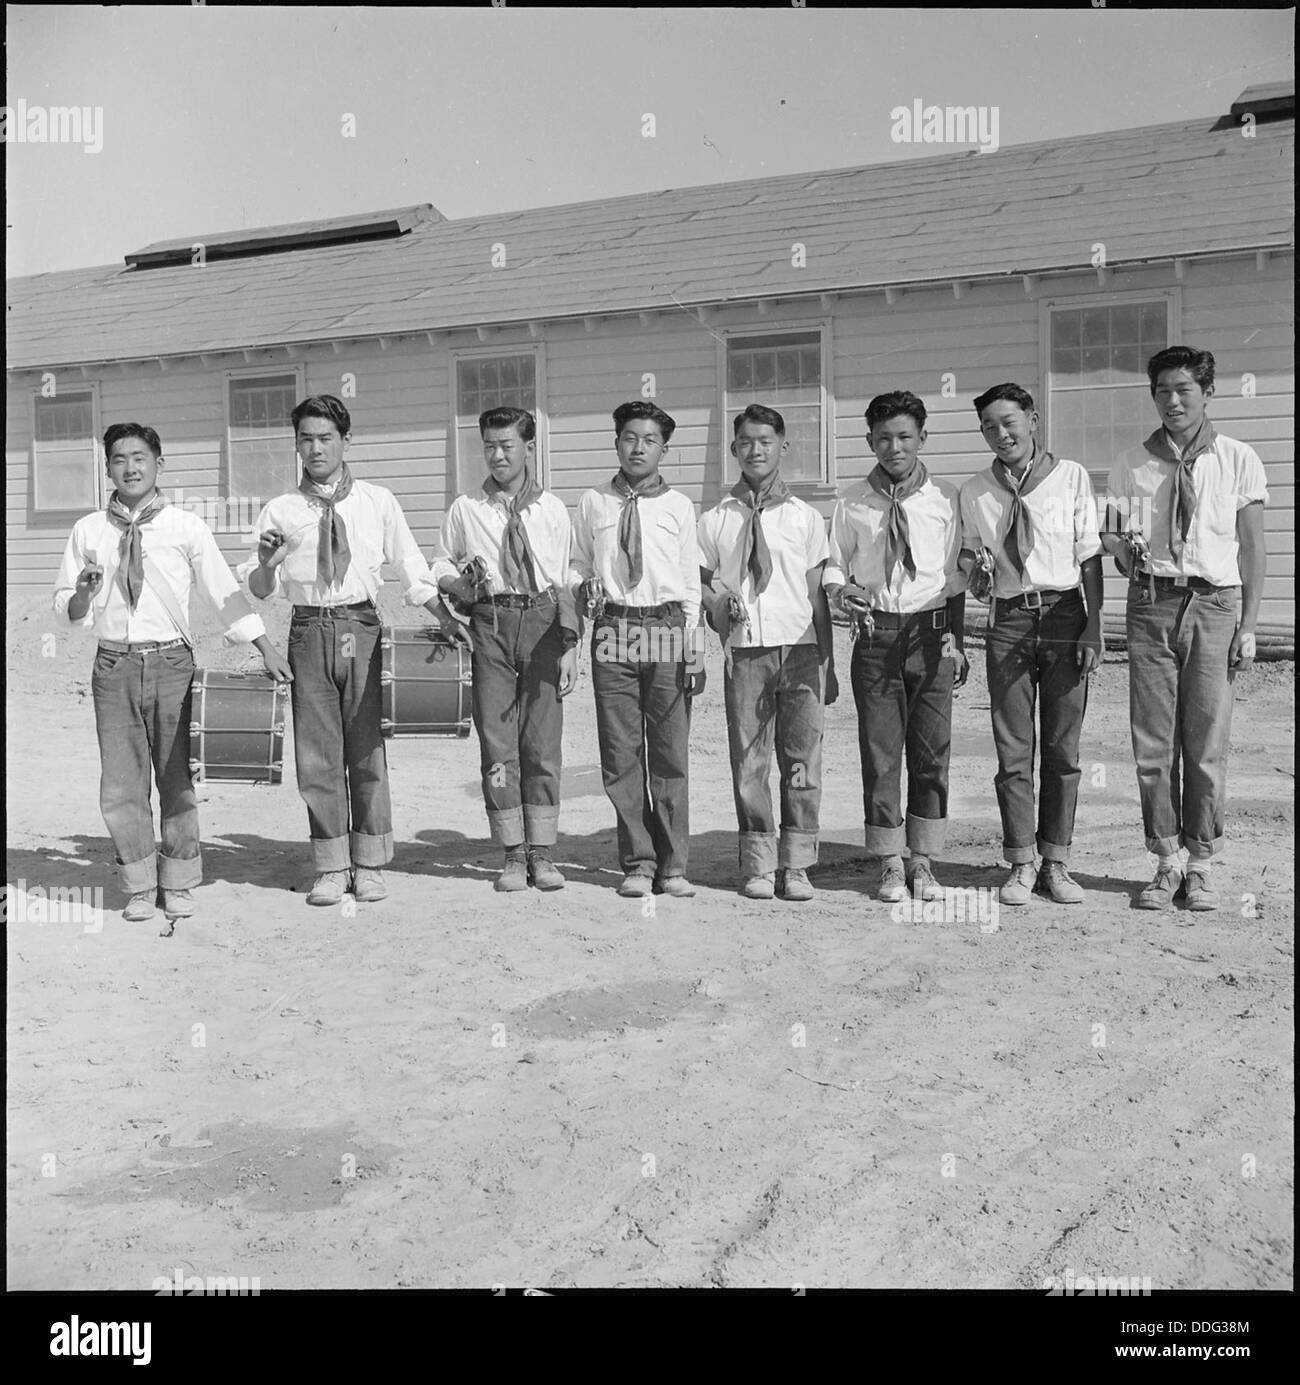 Topaz, Utah. Members of the drum and bugle corp, formerly a boy scout troop at Los Angeles, pose fo . . . 538693 Stock Photo